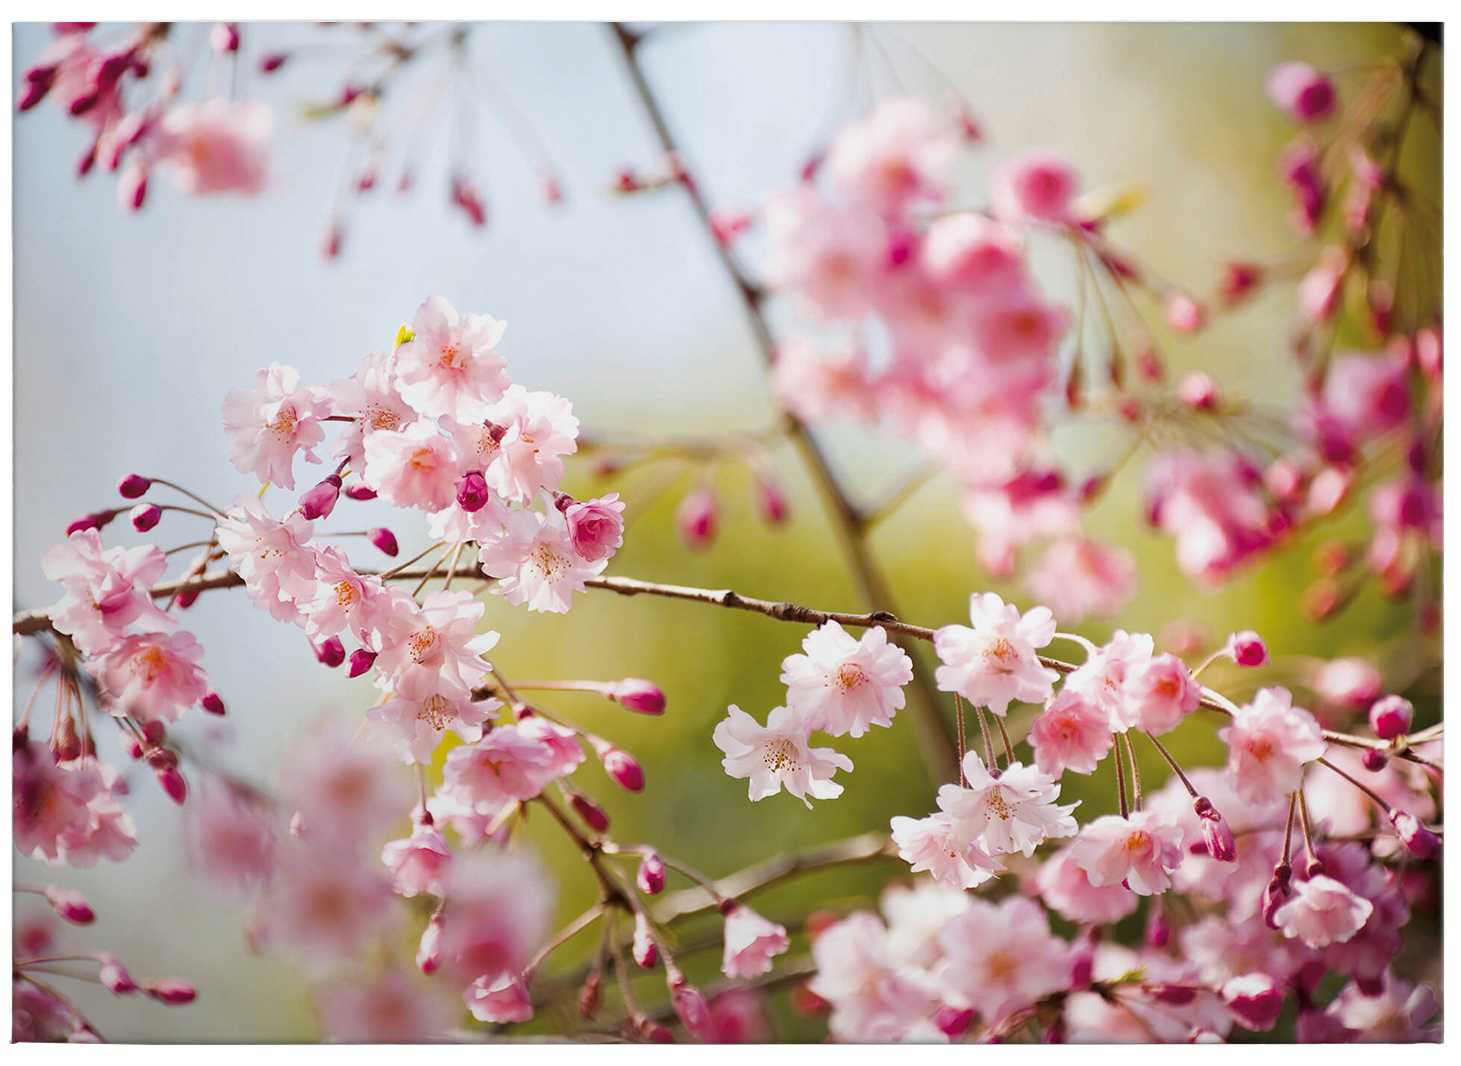             Nature canvas print with cherry blossom motif – pink
        